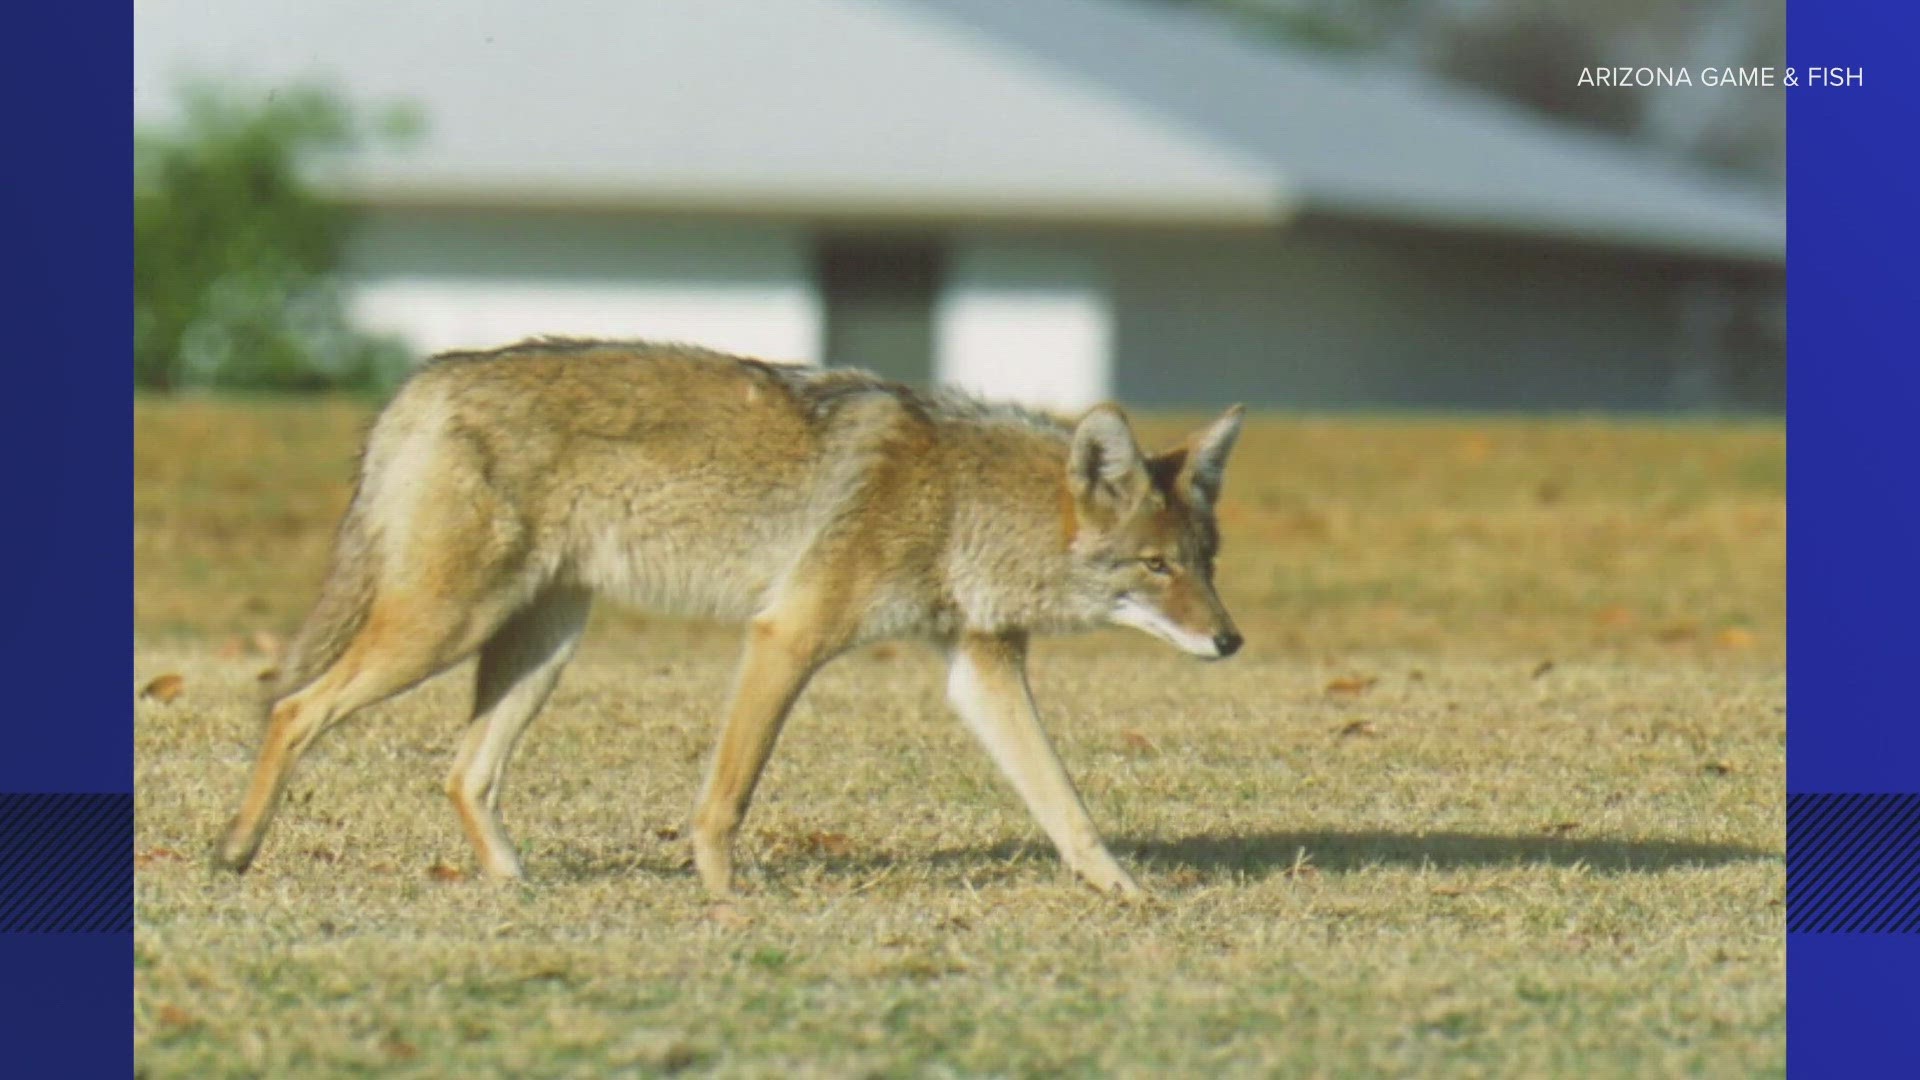 Three people have been bitten by a coyote in north Phoenix since Saturday. Game and Fish wildlife officers are actively searching for coyotes.